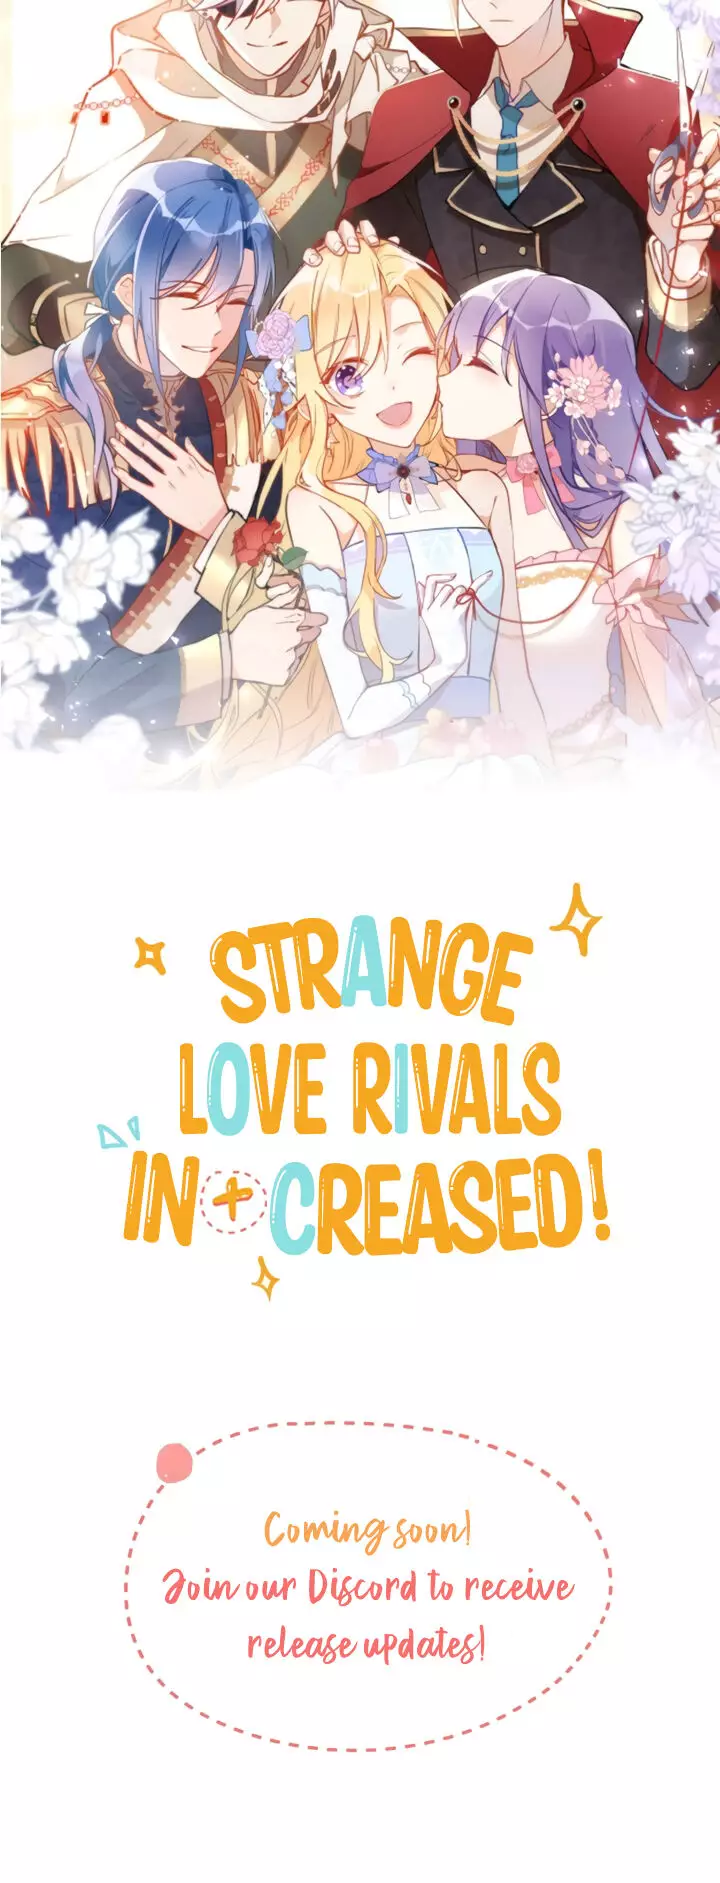 Strange Love Rivals Increased! - 0 page 4-0189d6f2